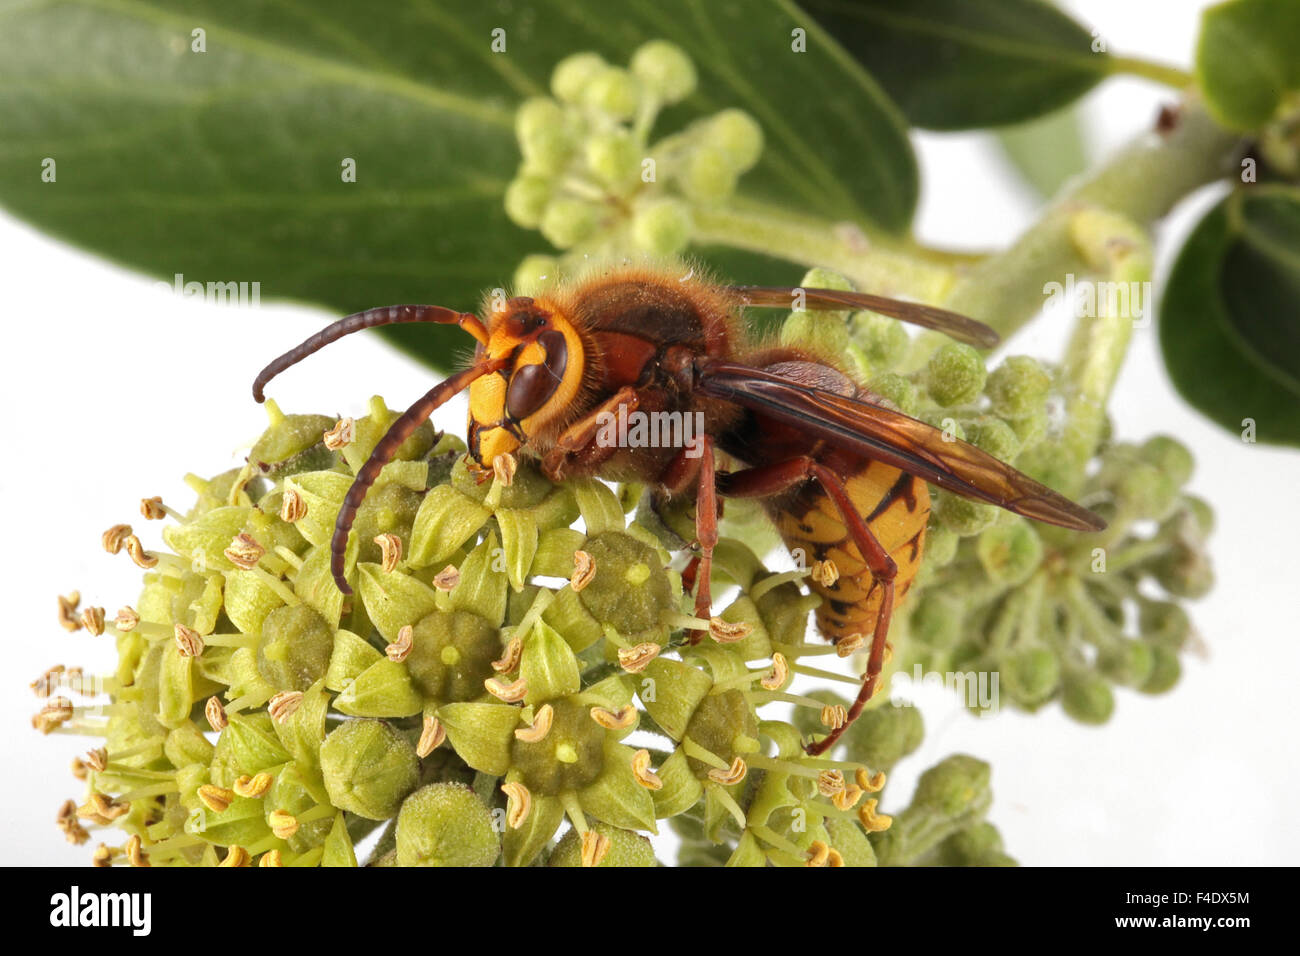 Close-up, macro photo of a Hornet Wasp feeding on an Ivy flower. Stock Photo